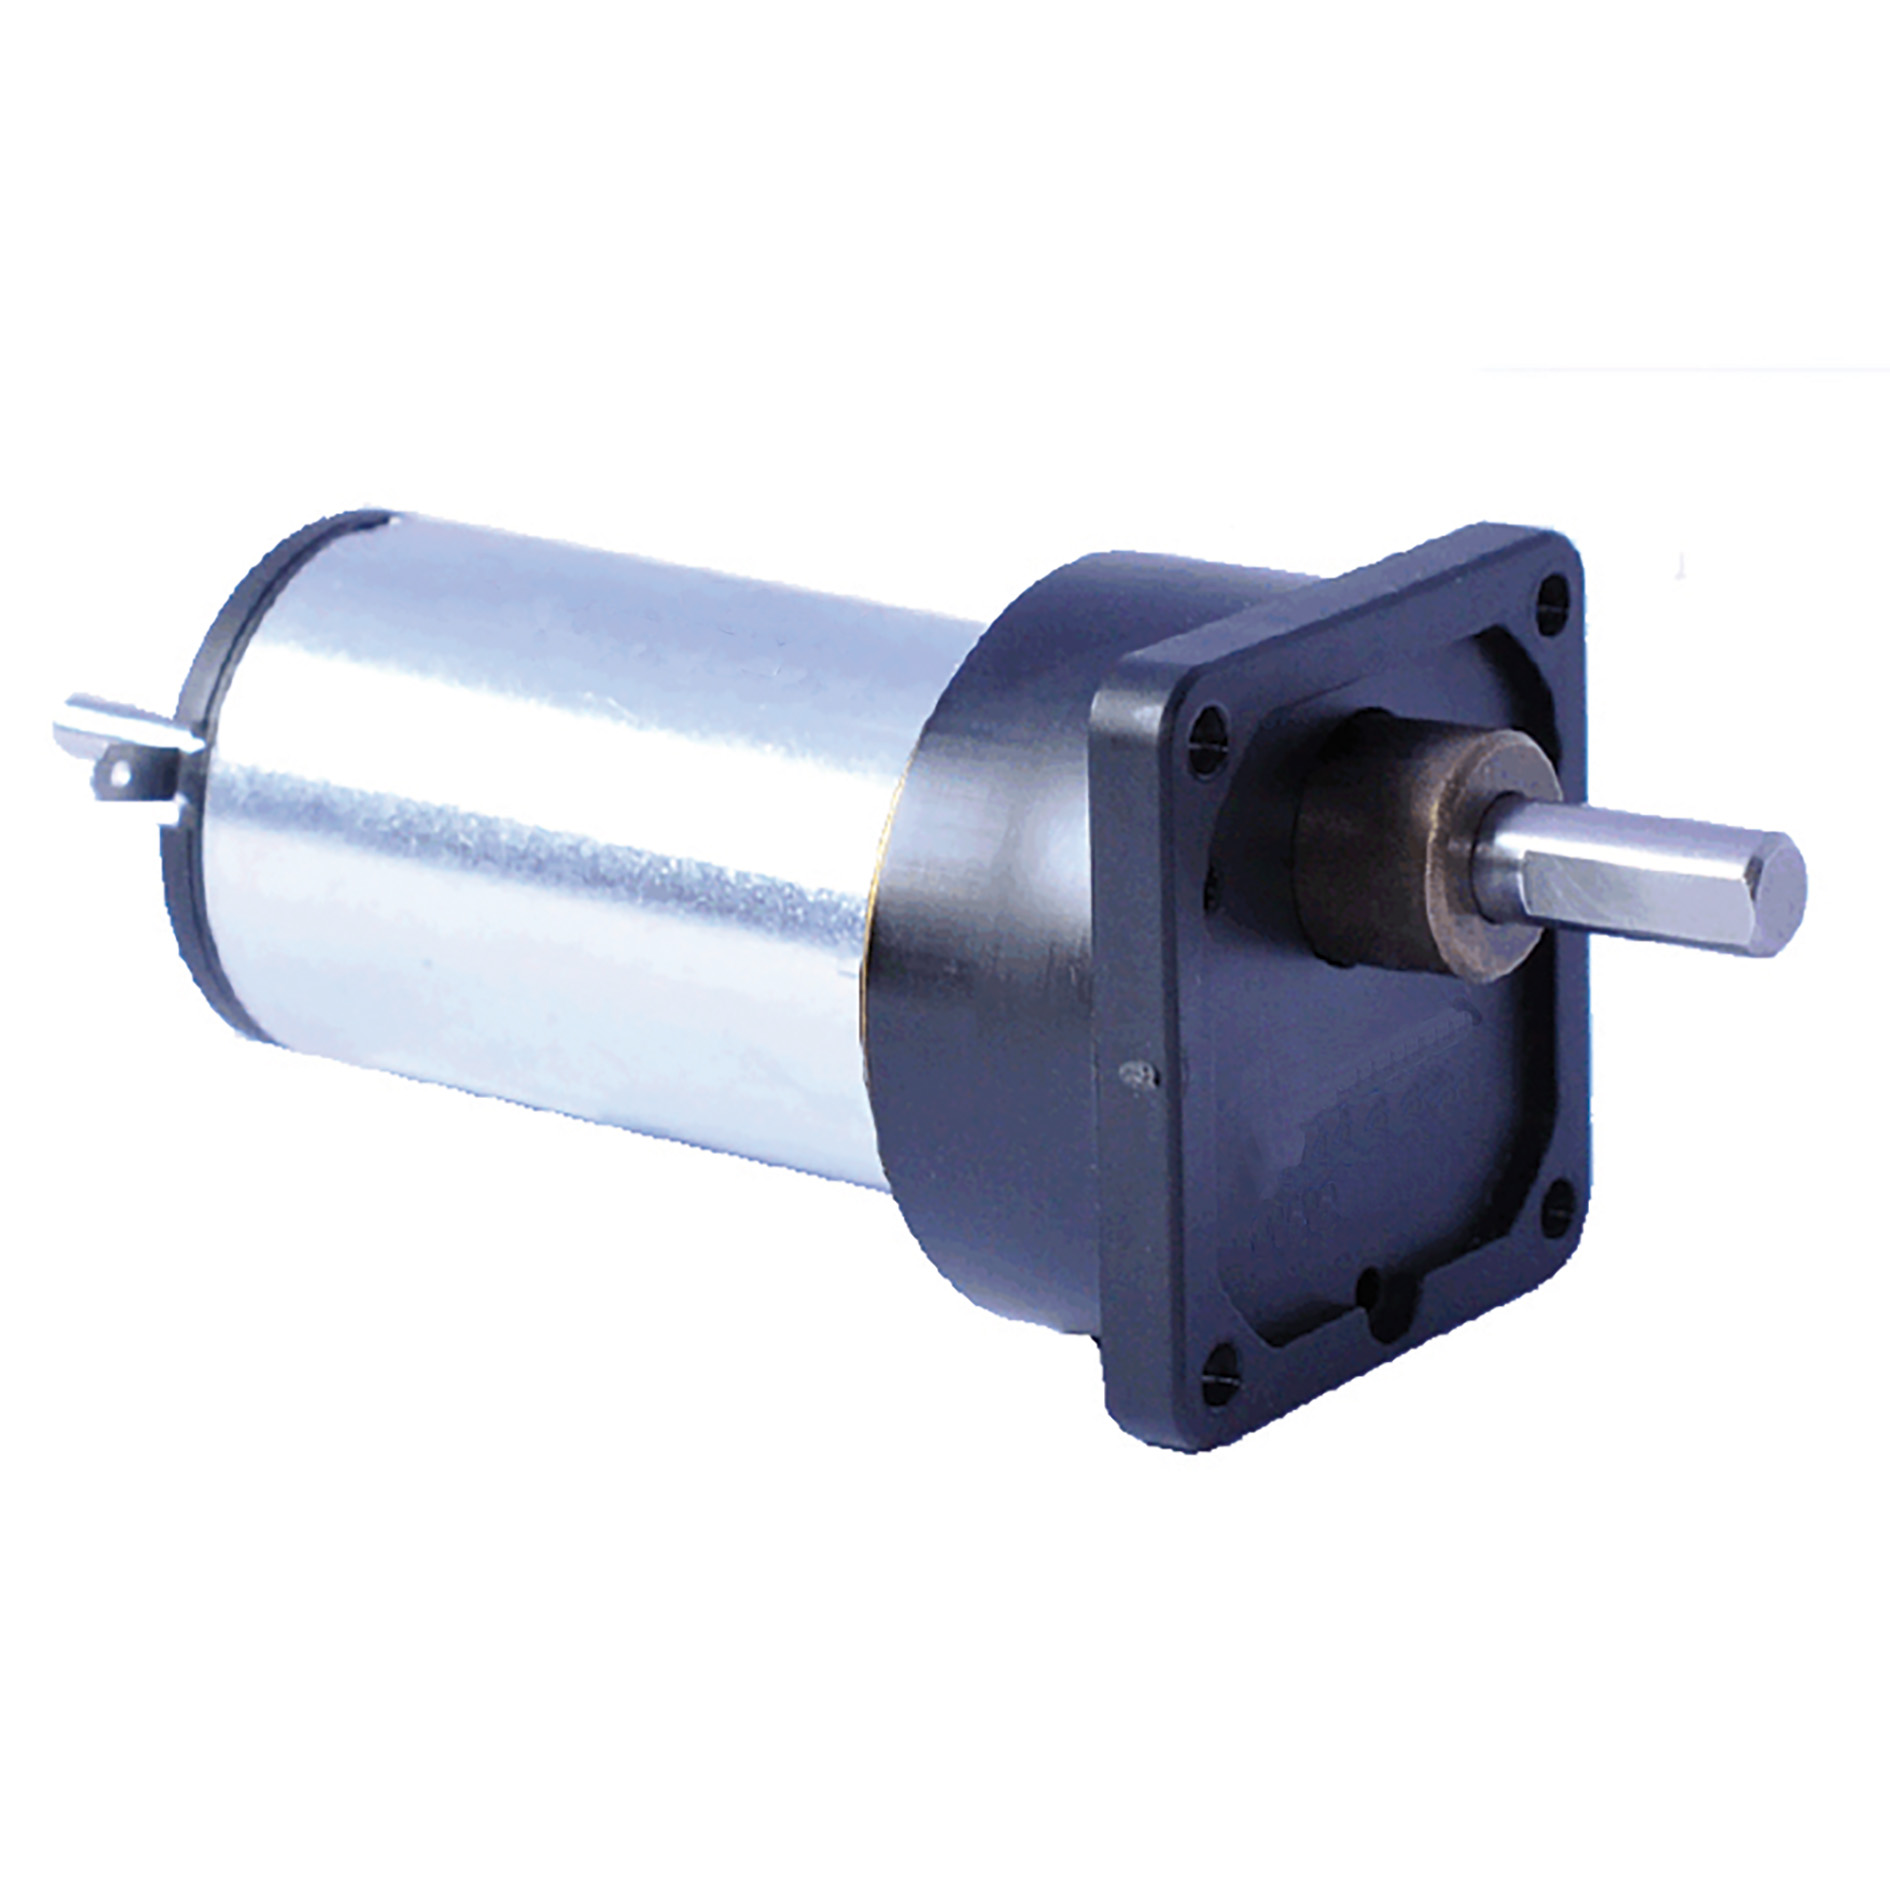 Motor-gearbox 12V and 24V DC - from 0,075 to 0,6Nm - 24 V DC - 